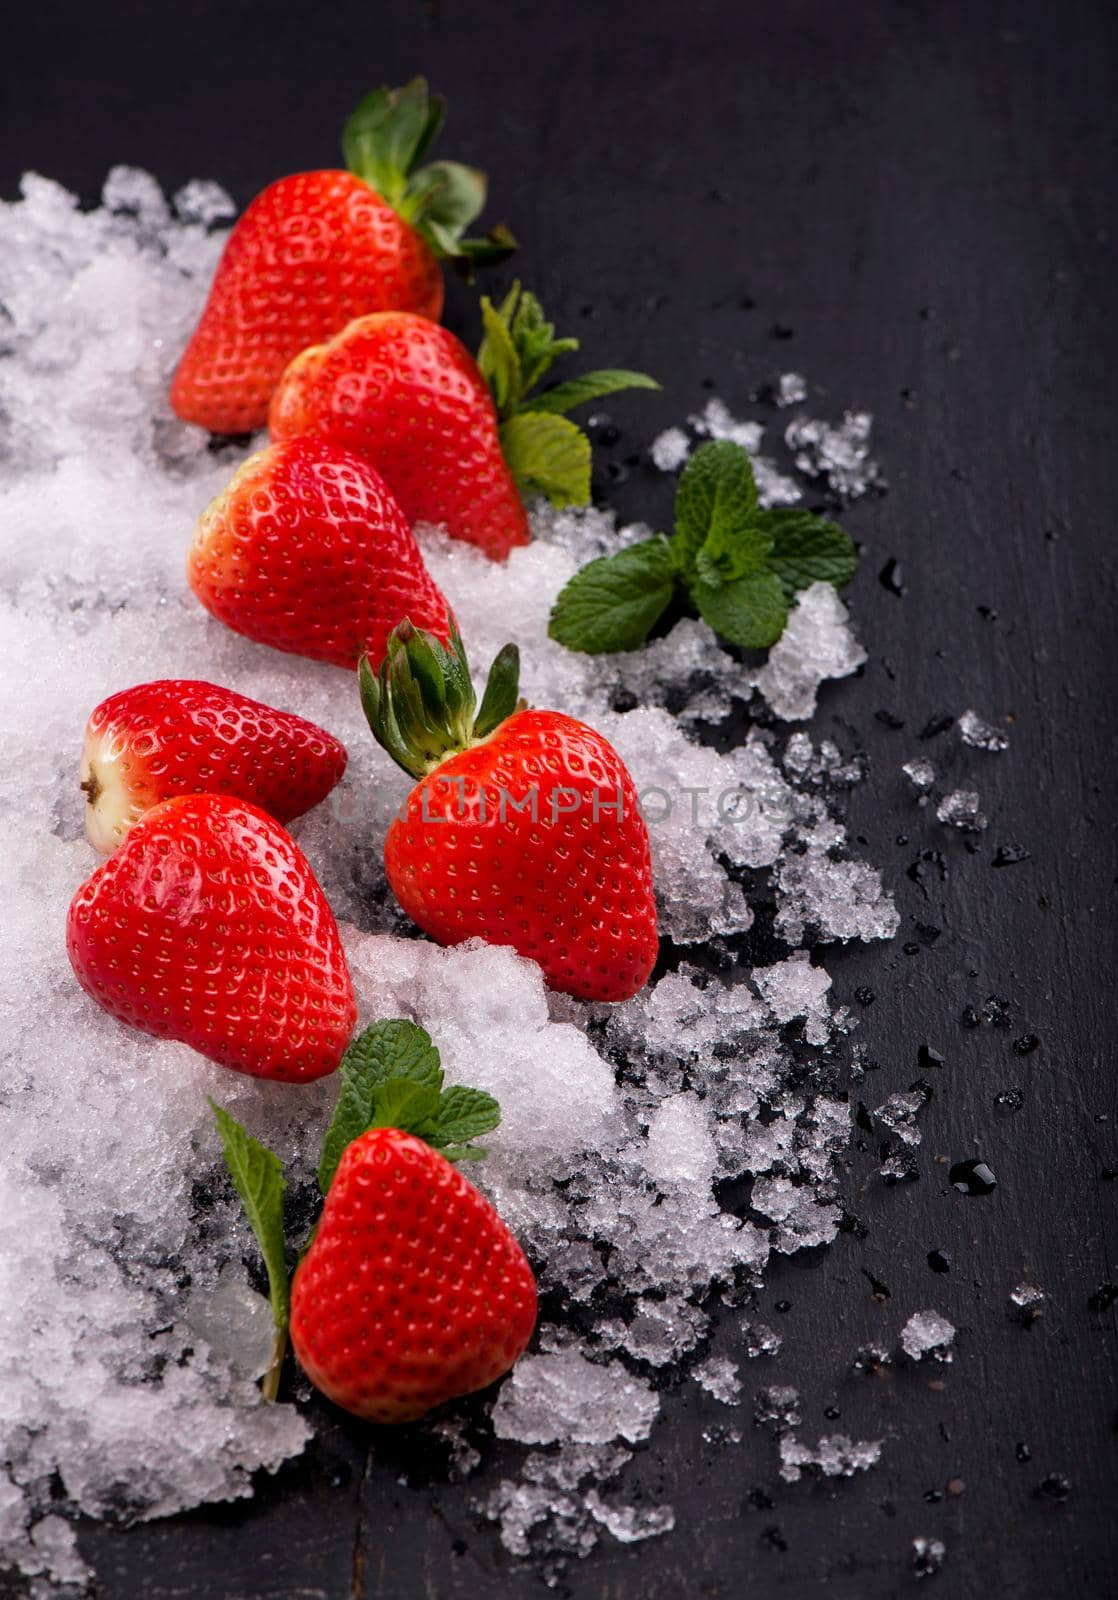 Strawberries, mint and iceon the black background by aprilphoto